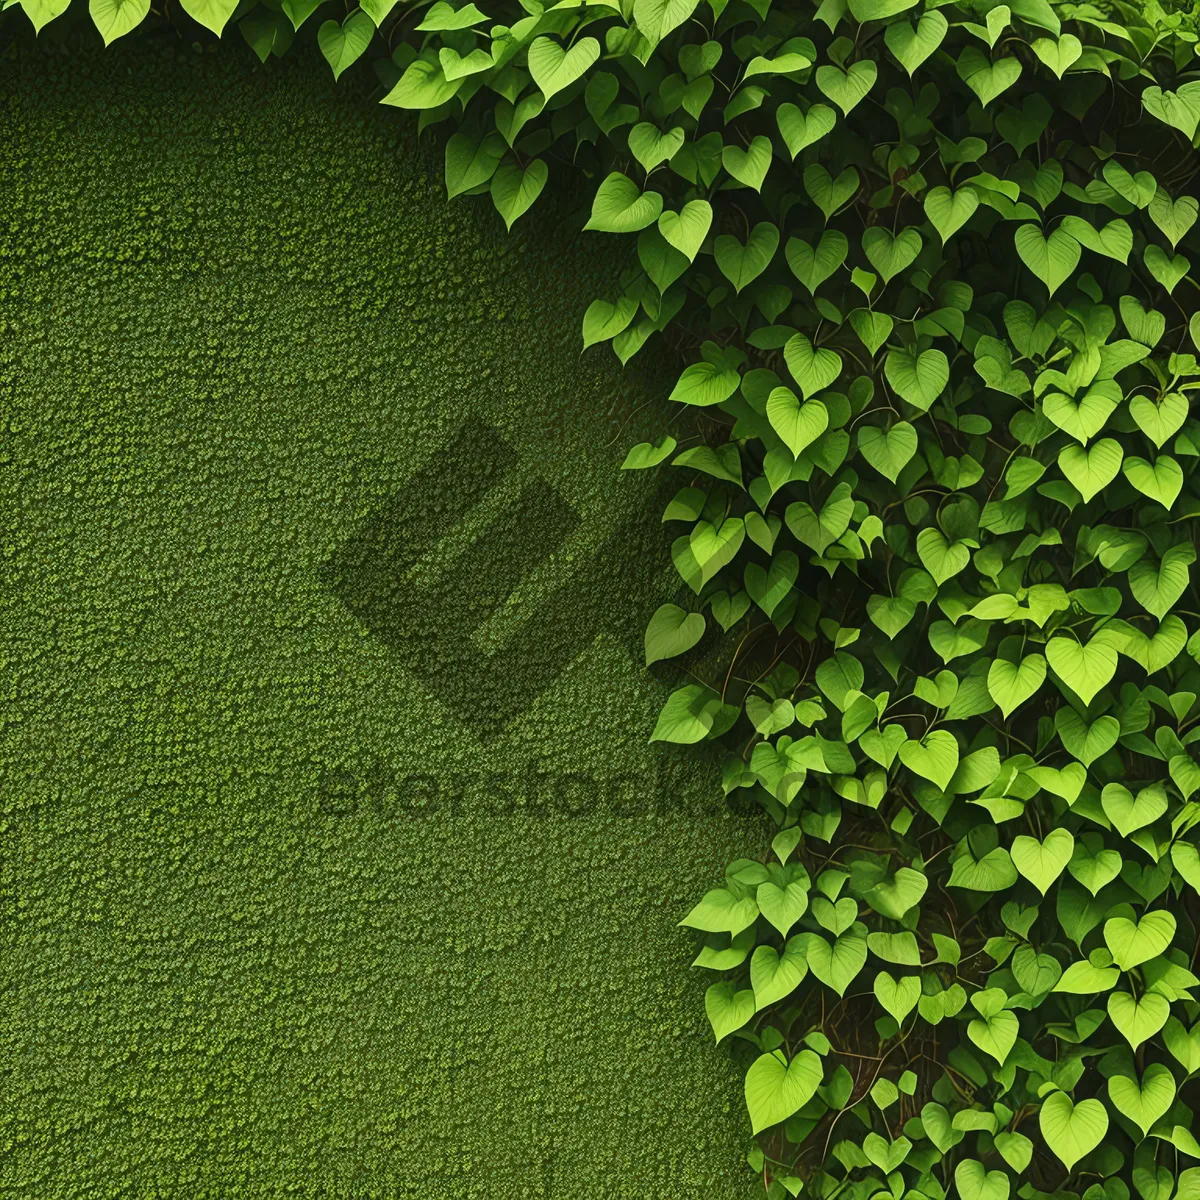 Picture of Greenery Textured Fern Pattern on Grass Wallpaper